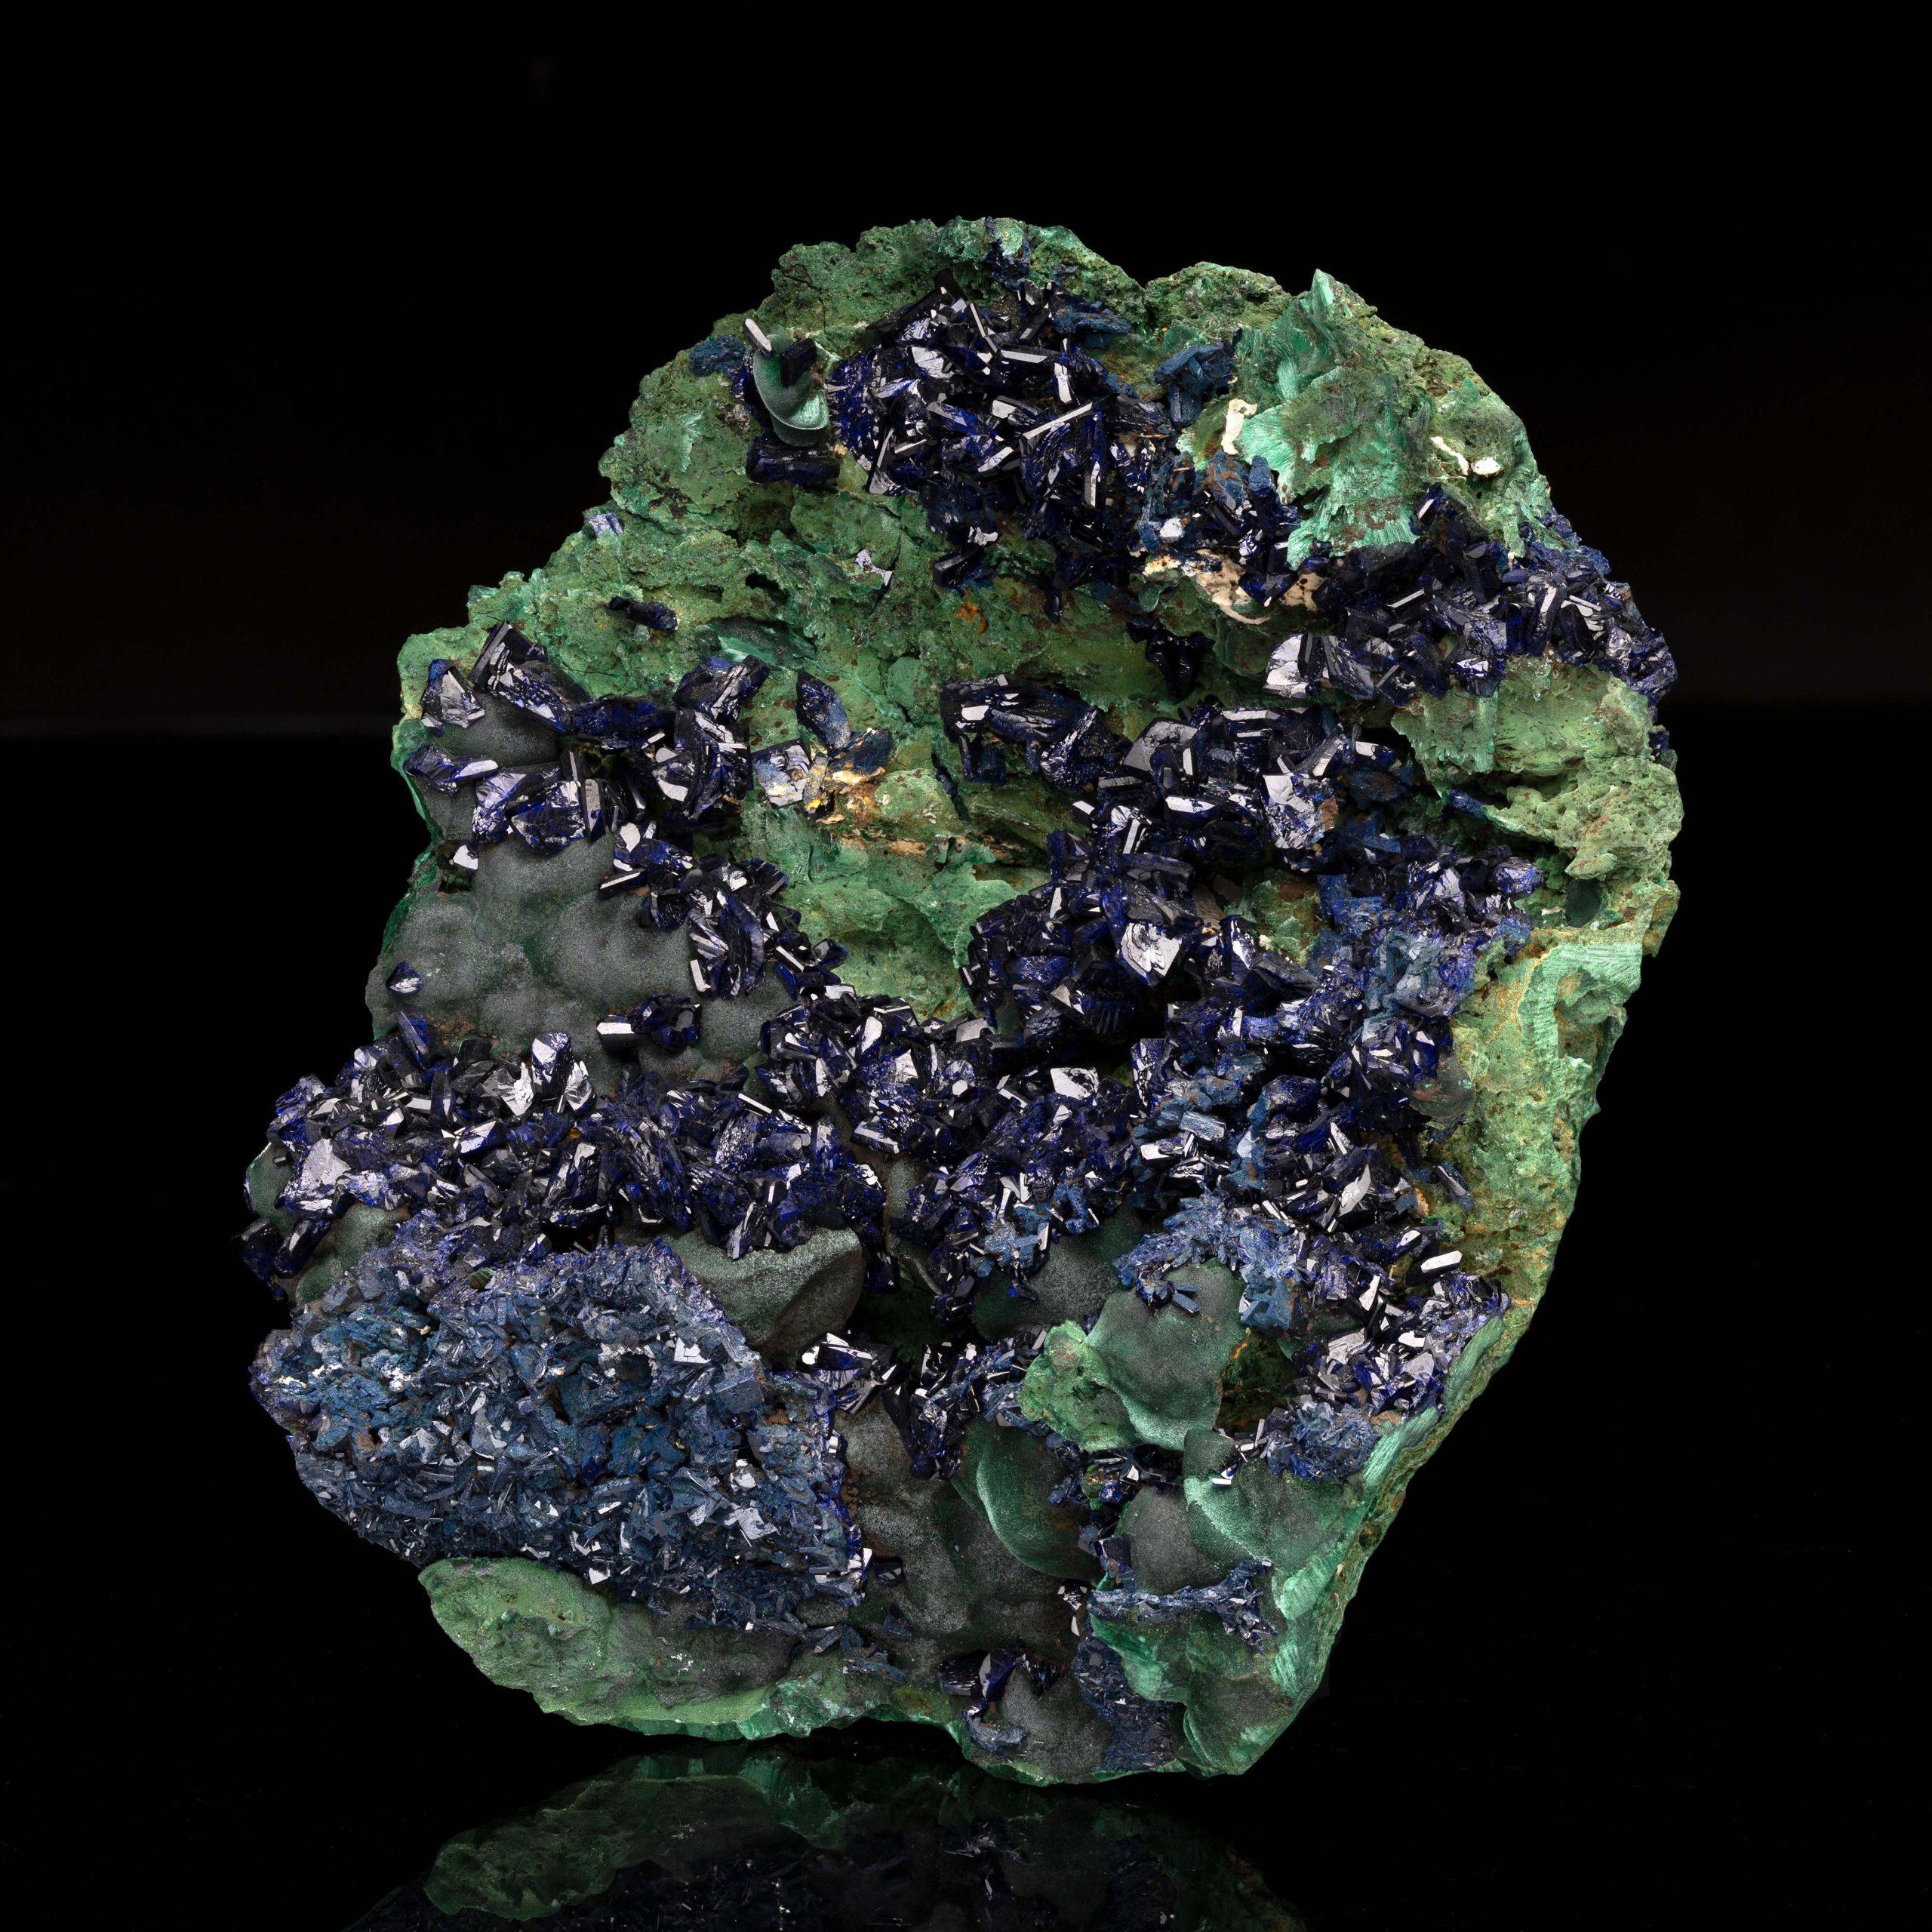 This specimen from Laos displays a stunning deep-blue azurite on a verdant backdrop of light green malachite. Offering sparkling luster and texturally fascinating, this combination piece displaying museum grade crystallization of these copper-based